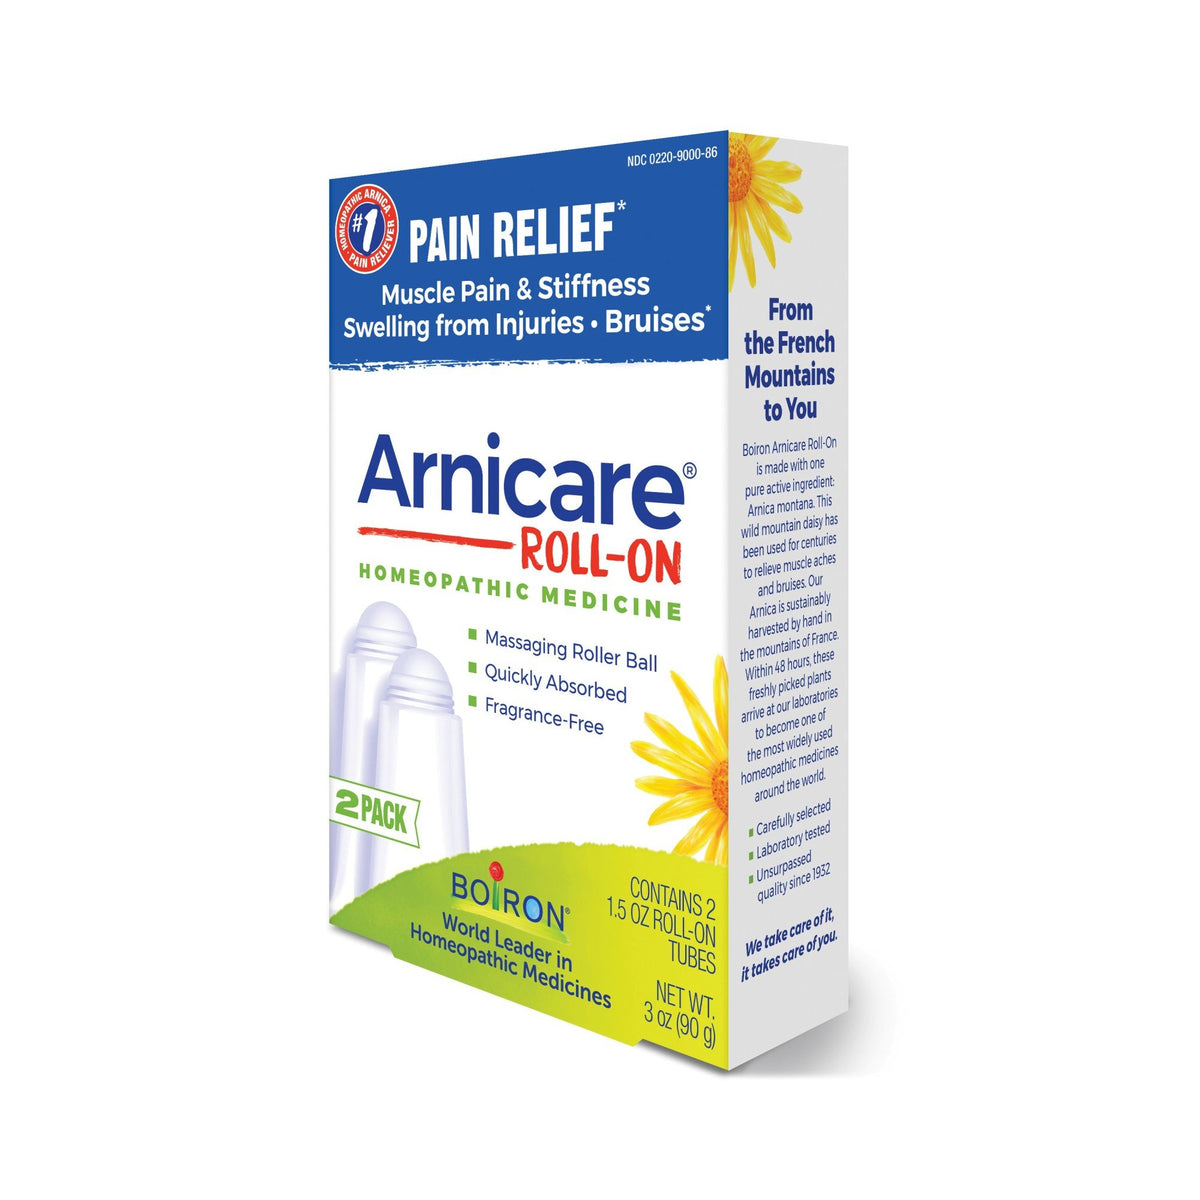 Boiron Arnicare Roll-on Twin Pack Homeopathic Medicine For Pain Relief 2 (1.5 oz) Roll-on